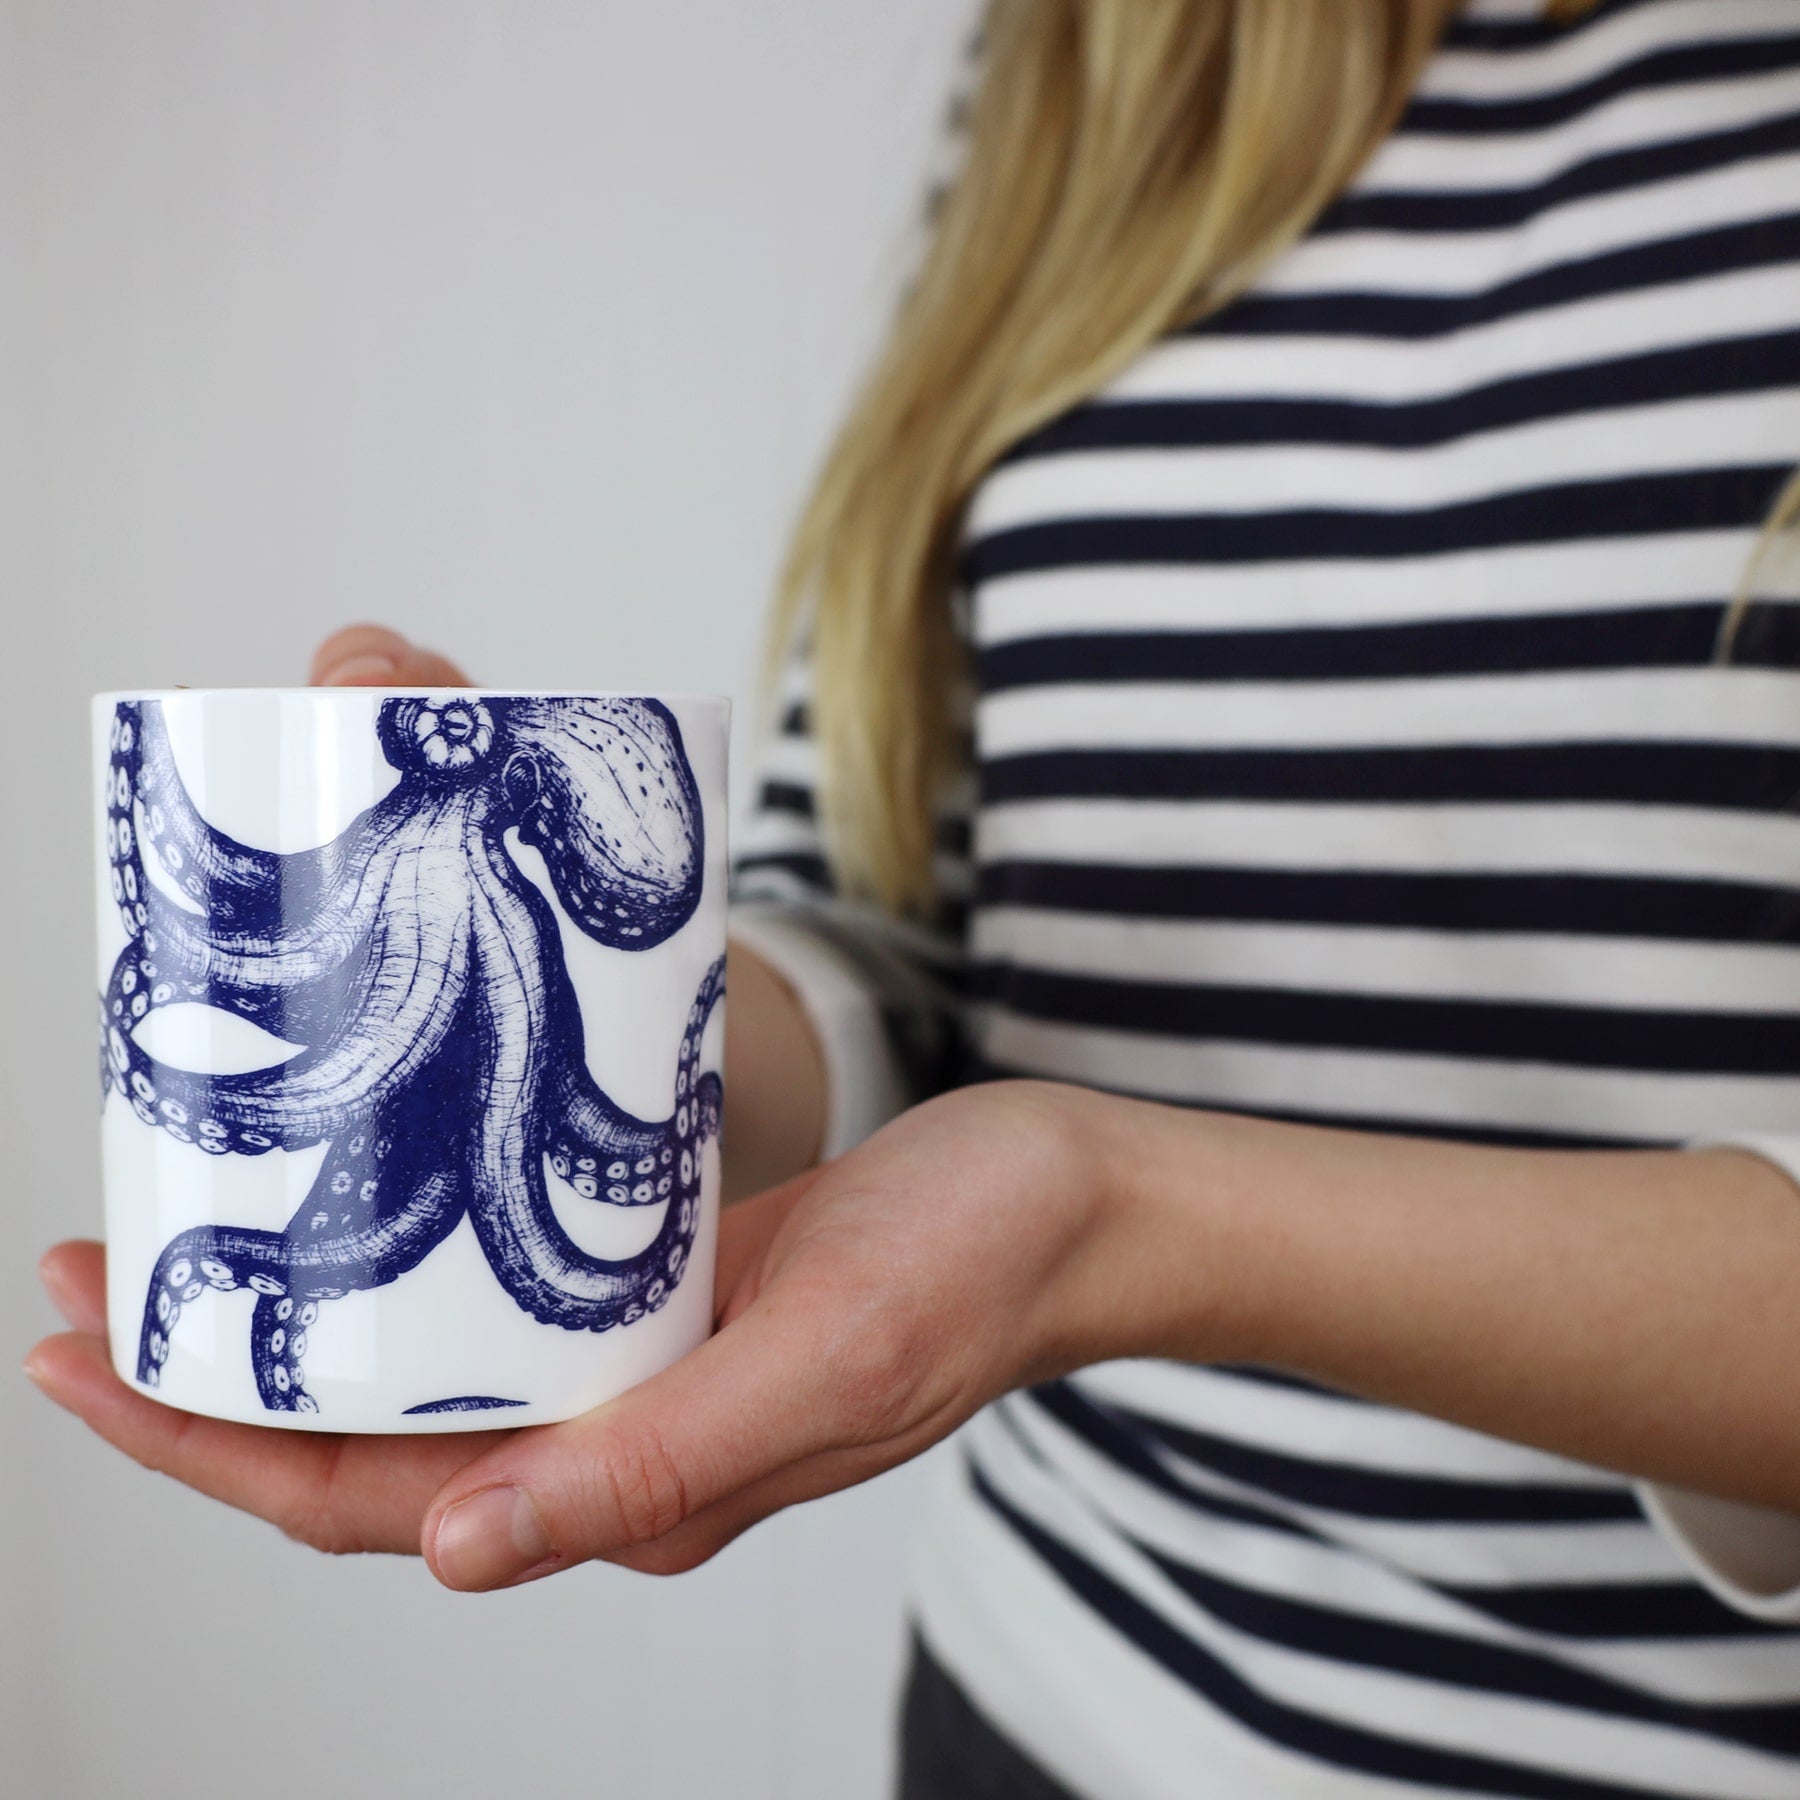 The photo shows Bone china mug featuring a hand drawn octopus design in classic blue and white being held by a woman